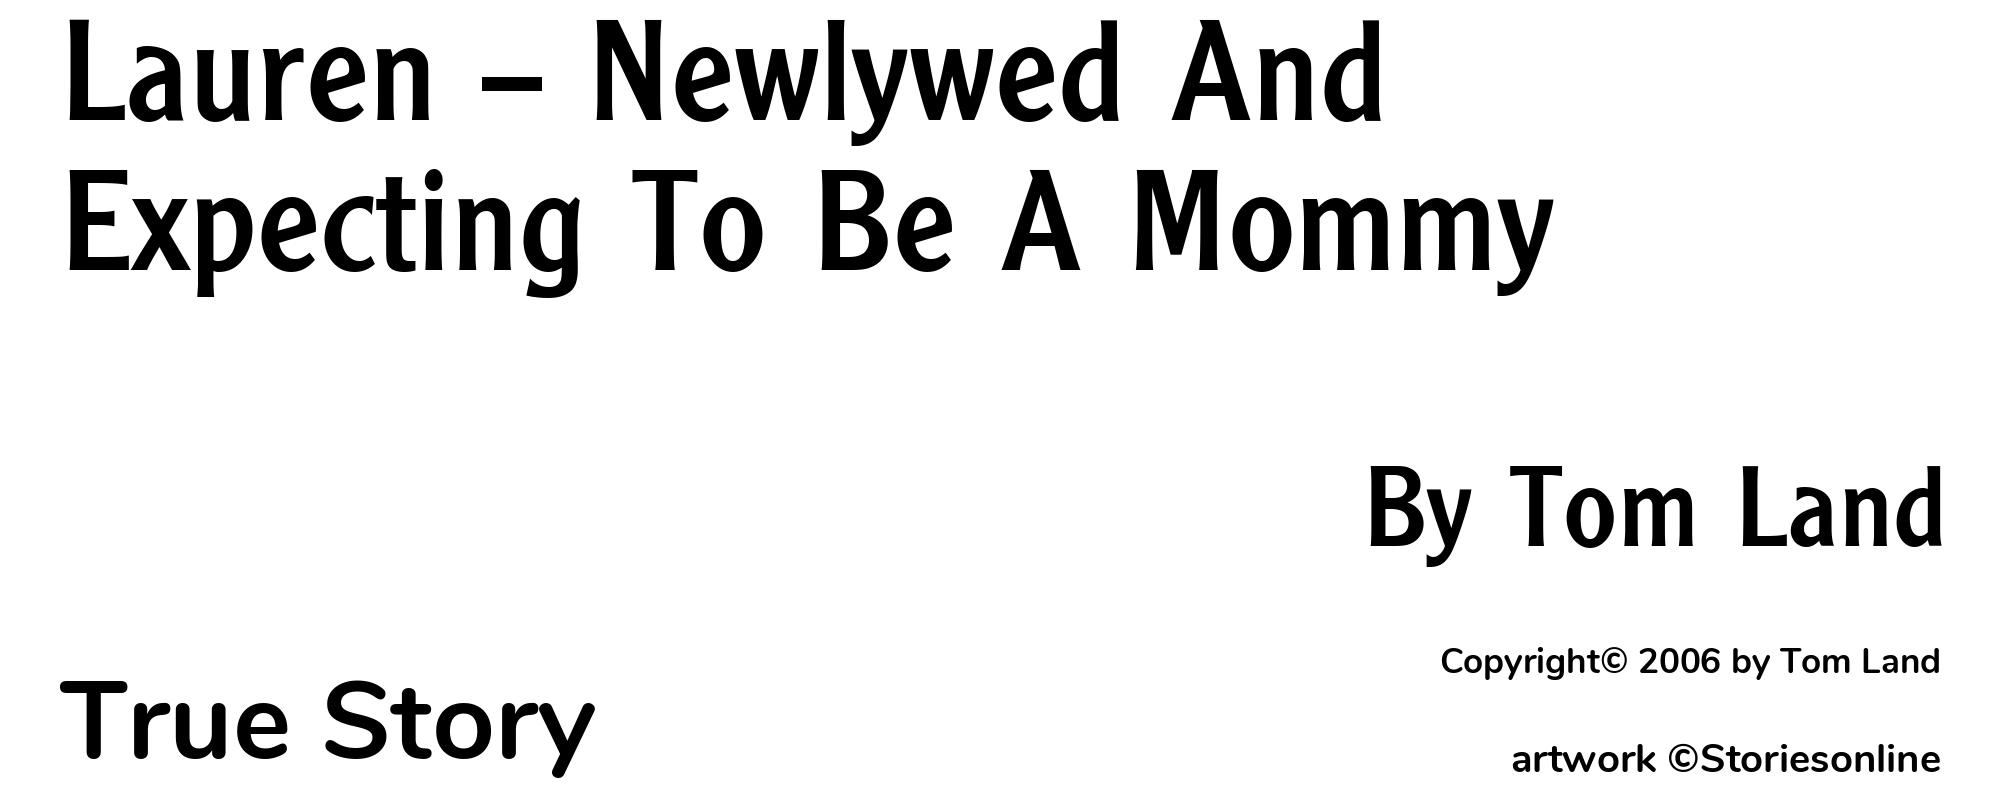 Lauren -- Newlywed And Expecting To Be A Mommy - Cover